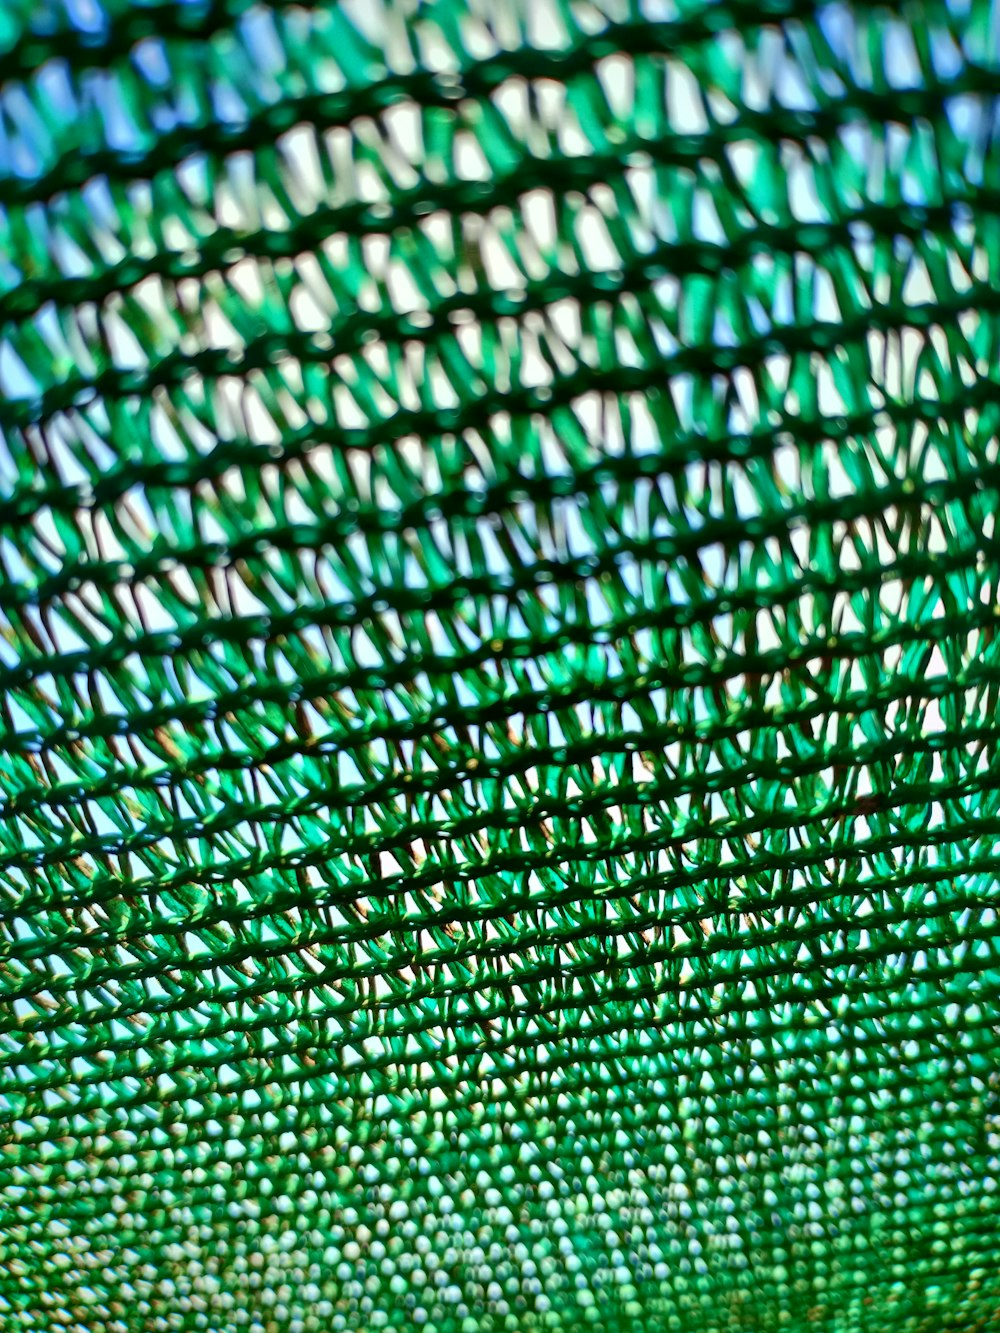 a close up view of a green net